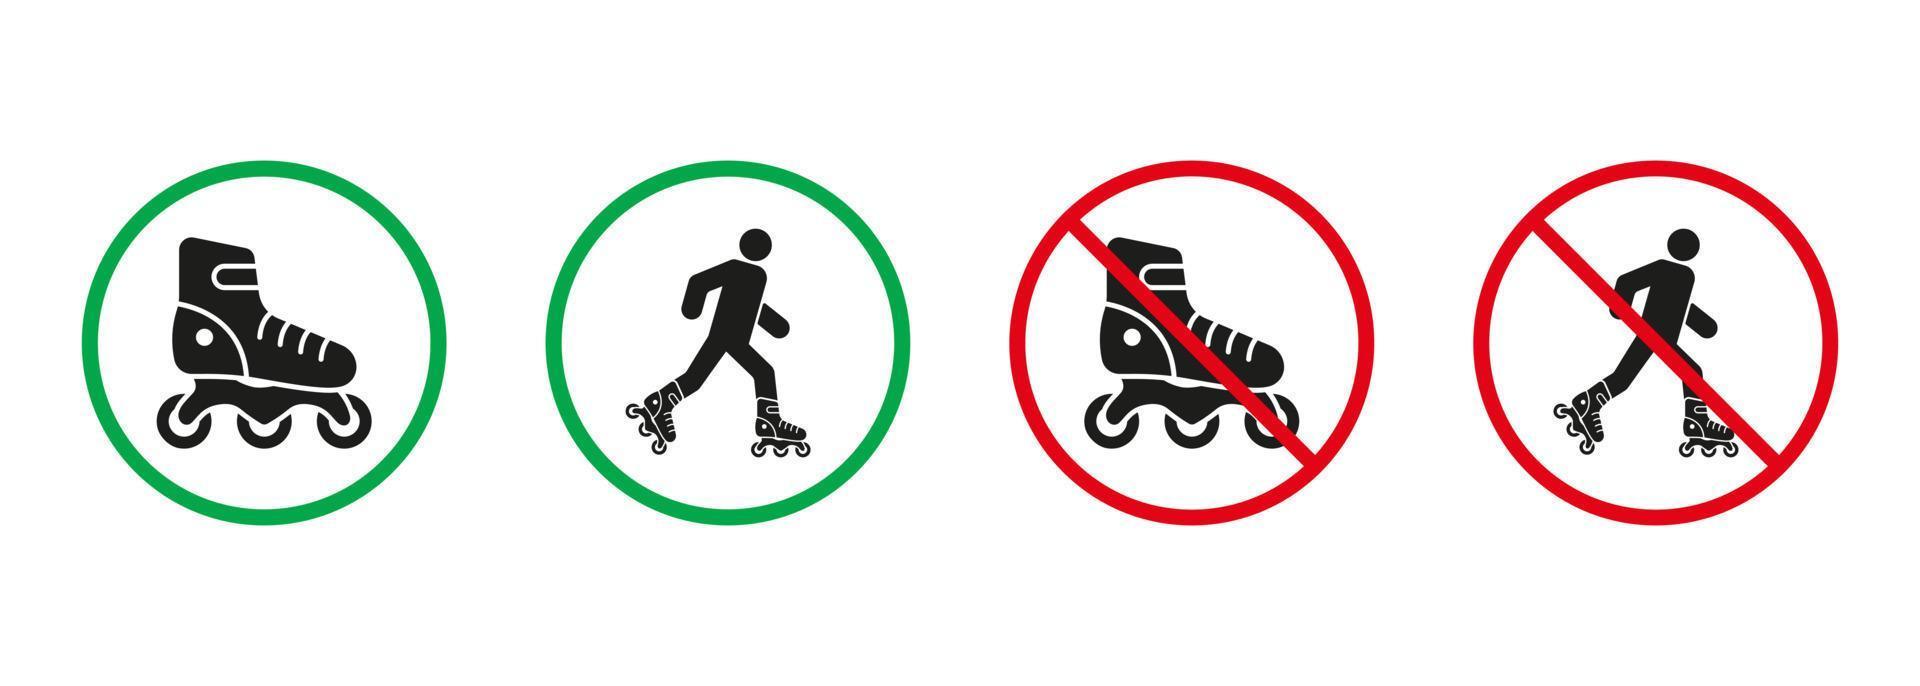 Man in Roller Skate Red and Green Signs. Rollerblading Silhouette Icons Set. Allowed and Prohibited Rollerskate, Entry with Eco Transport Pictogram. Isolated Vector Illustration.